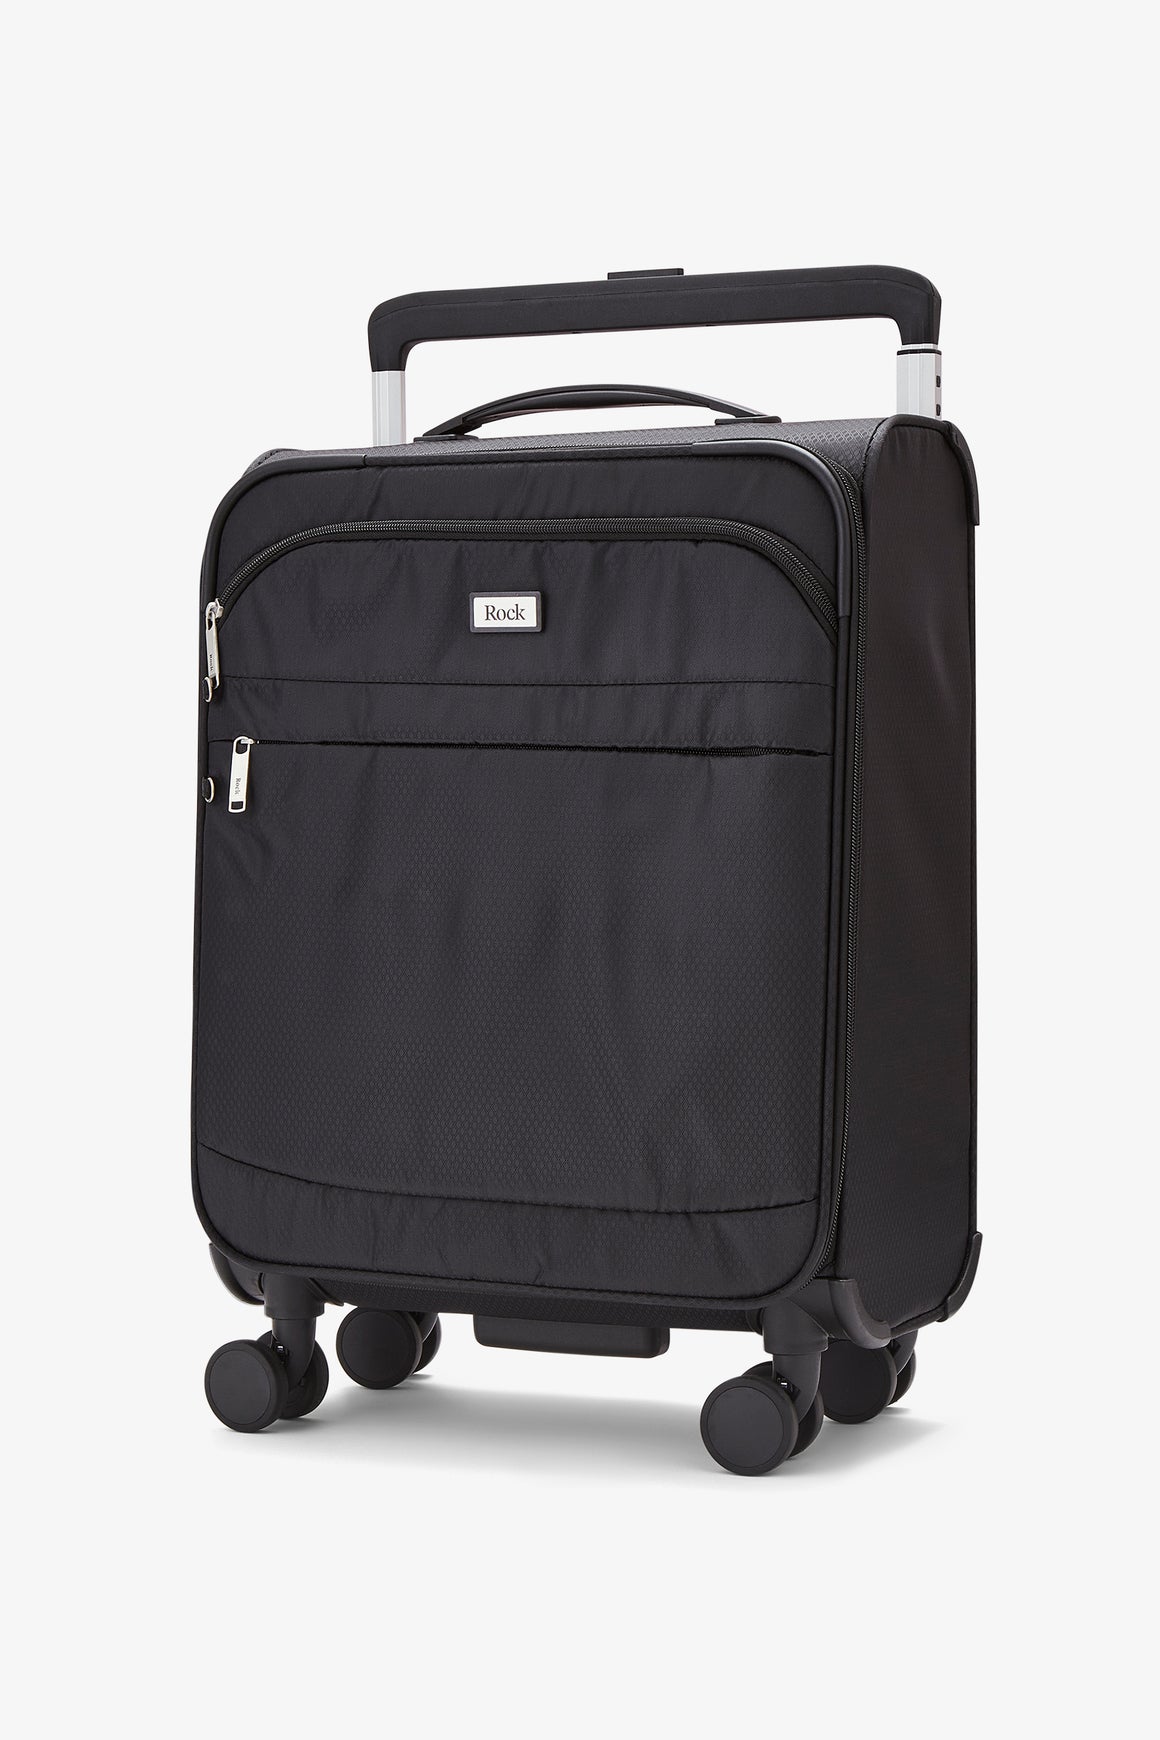 Rocklite Small Suitcase in Black